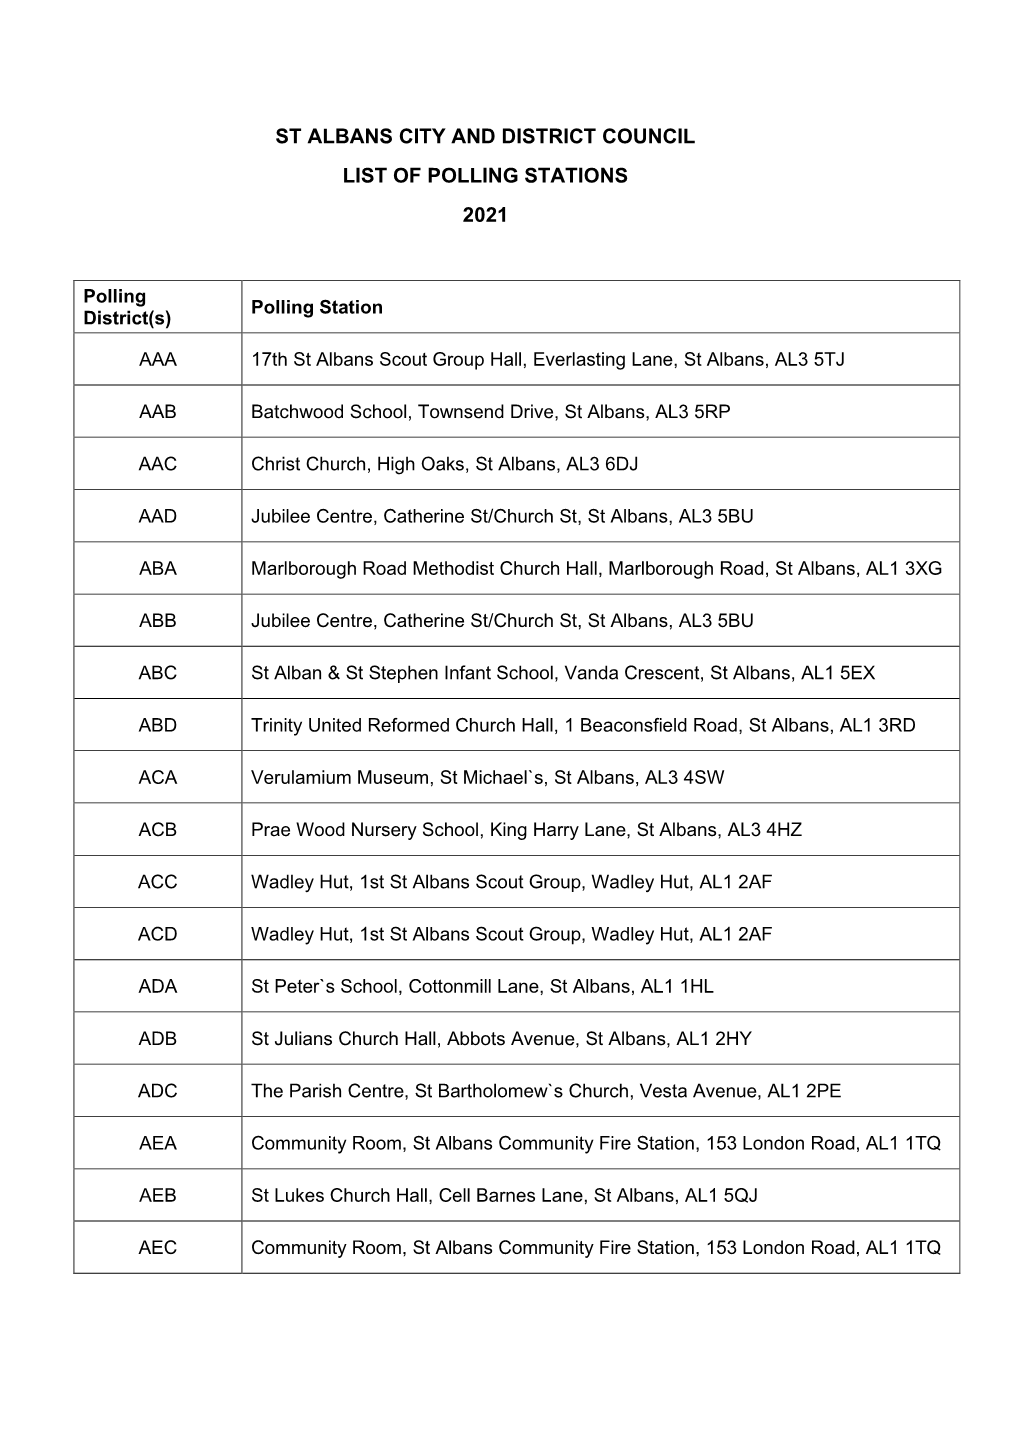 List of Polling Stations 2021.Pdf